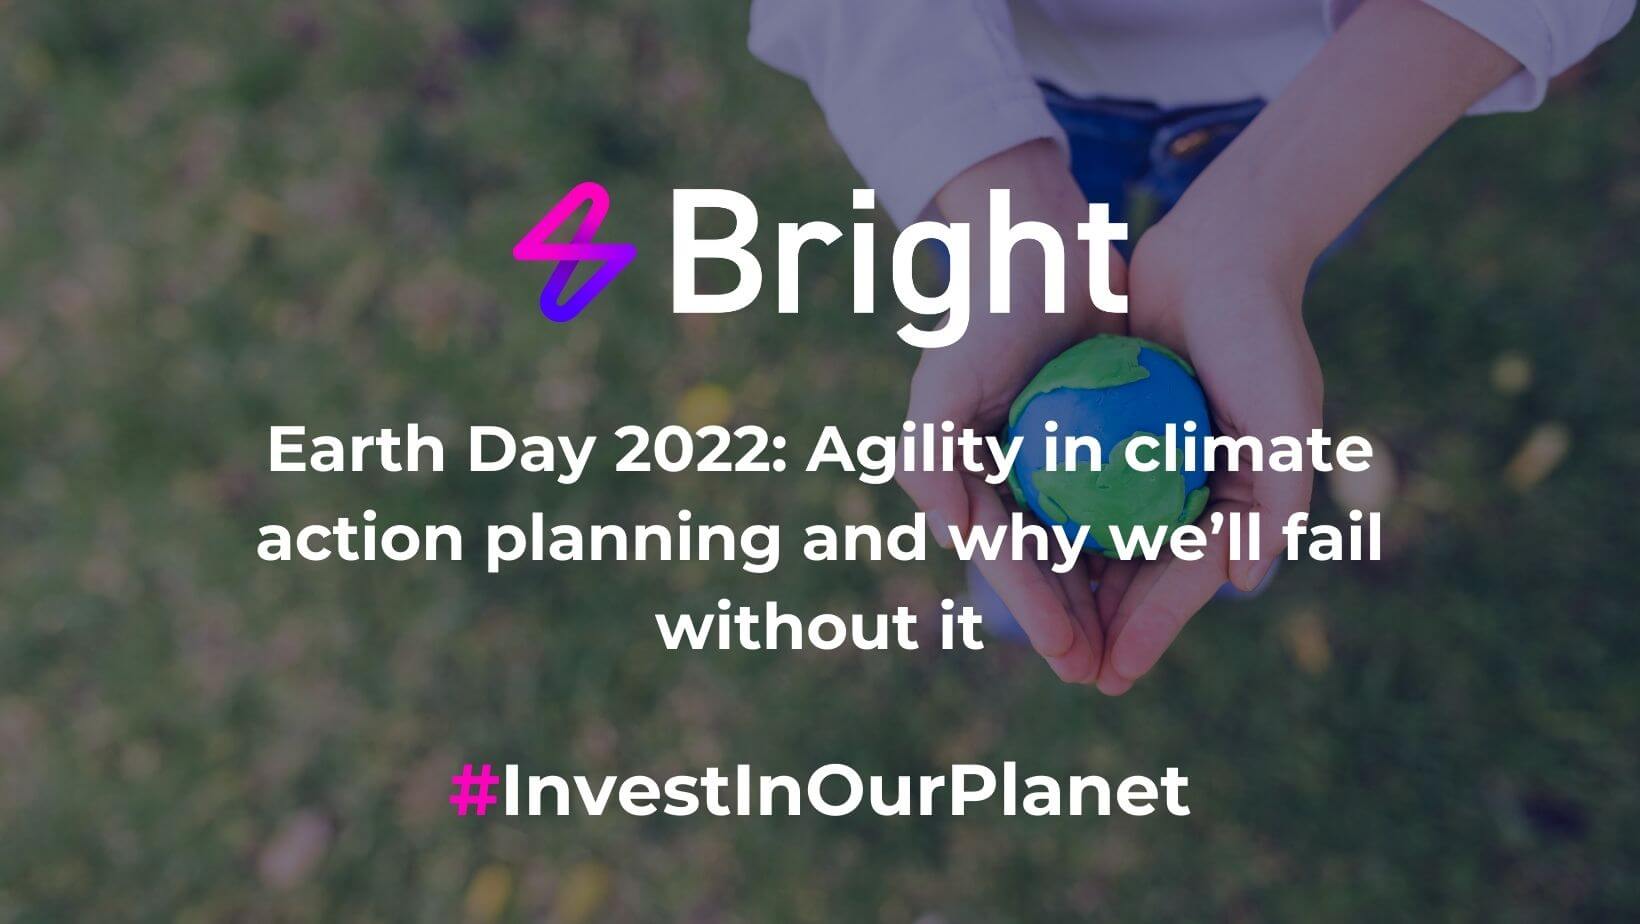 Earth Day 2022: Agility in climate action planning and why we’ll fail without it